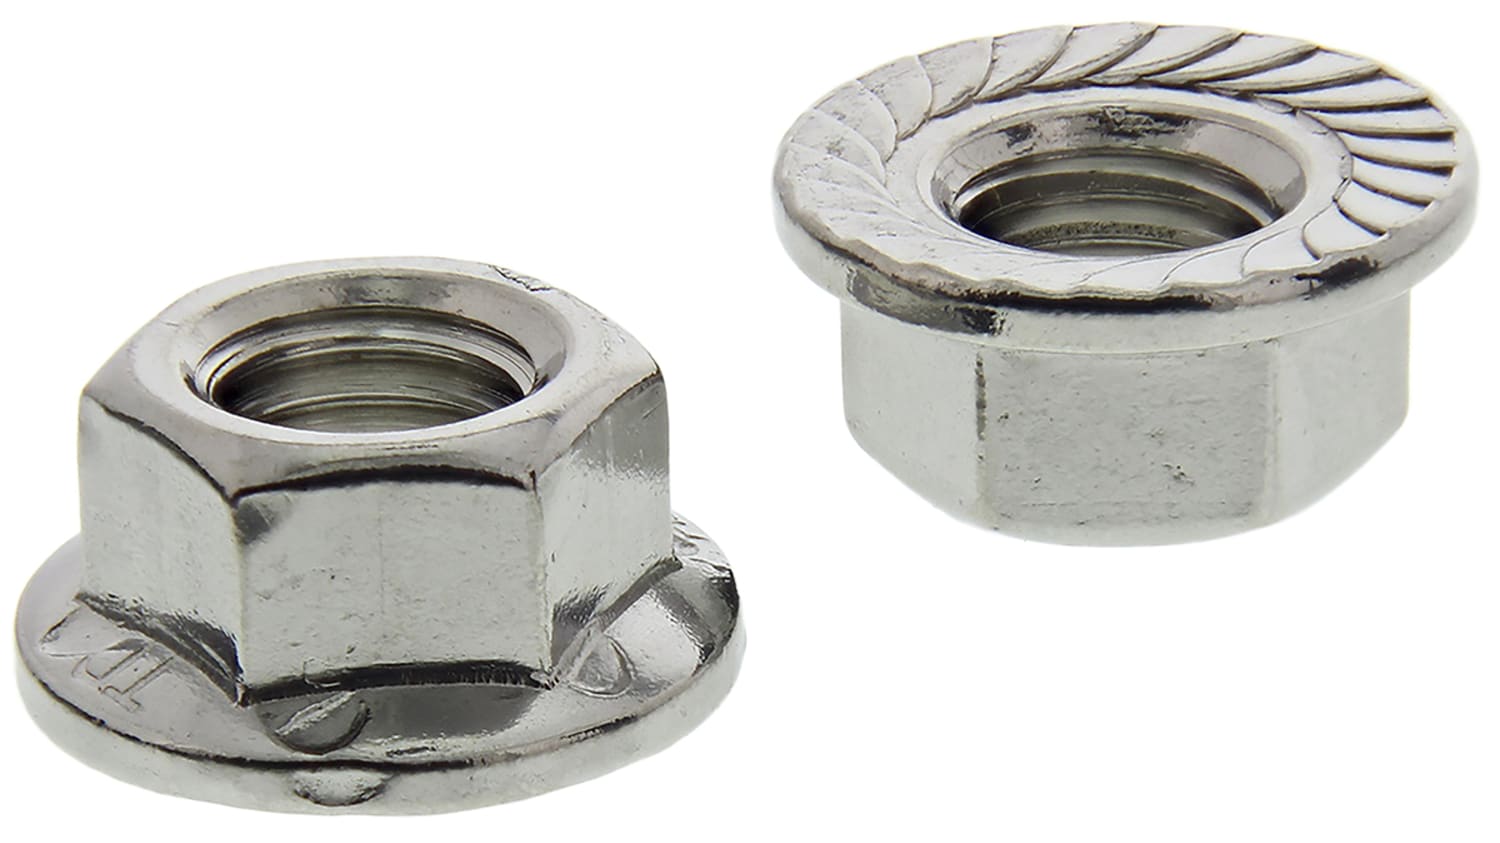 Qty 2 M12 304 A2 Grade Stainless Steel Hex Serrated Nut 12mm Flange Nuts 